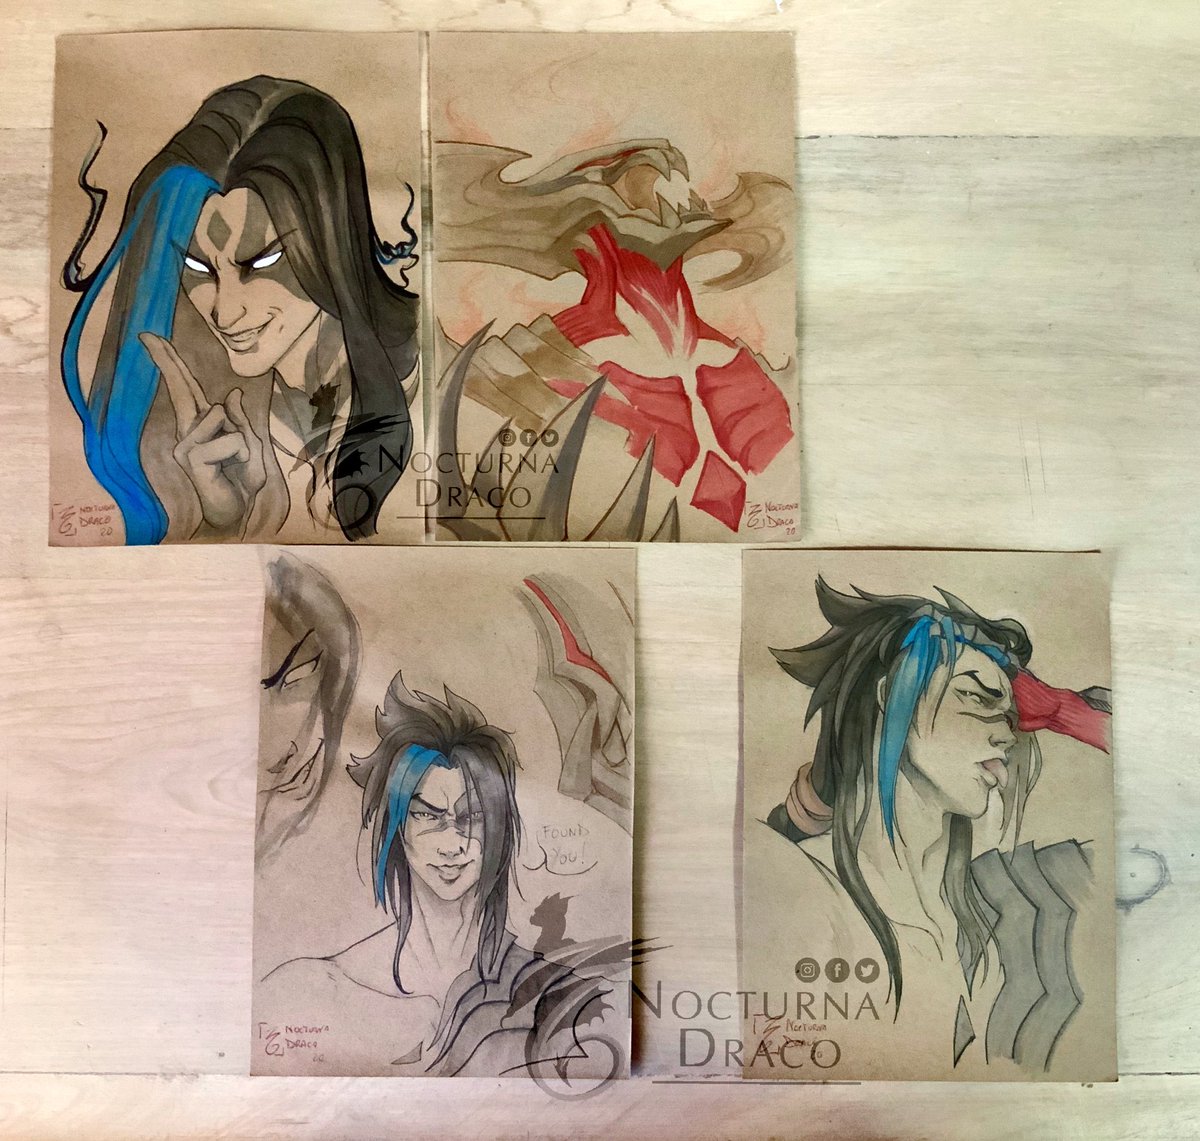 Since more than one kept asking for Kayn, here he is.
Be spoilt for choice.

#kayn #rhaast #LeagueOfLegends #ArtofLegends #LeagueOfLegendsFanArt #League_of_Legends 